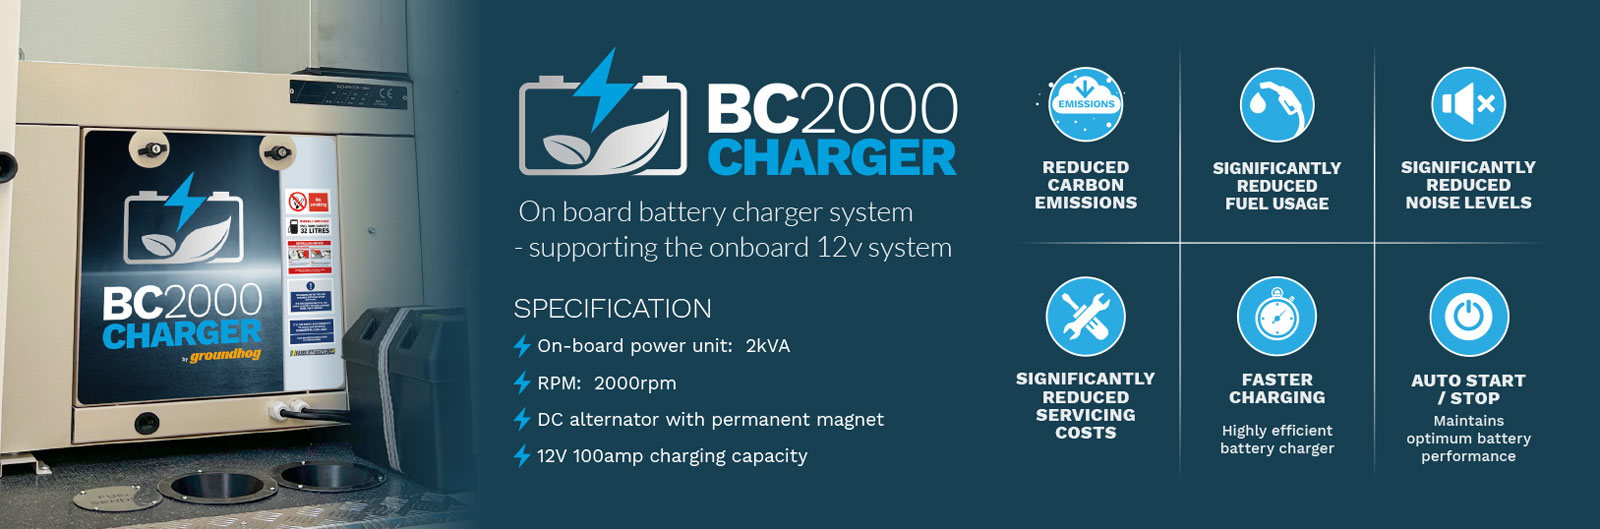 BC2000 On board battery charger system - supporting the onboard 12v system